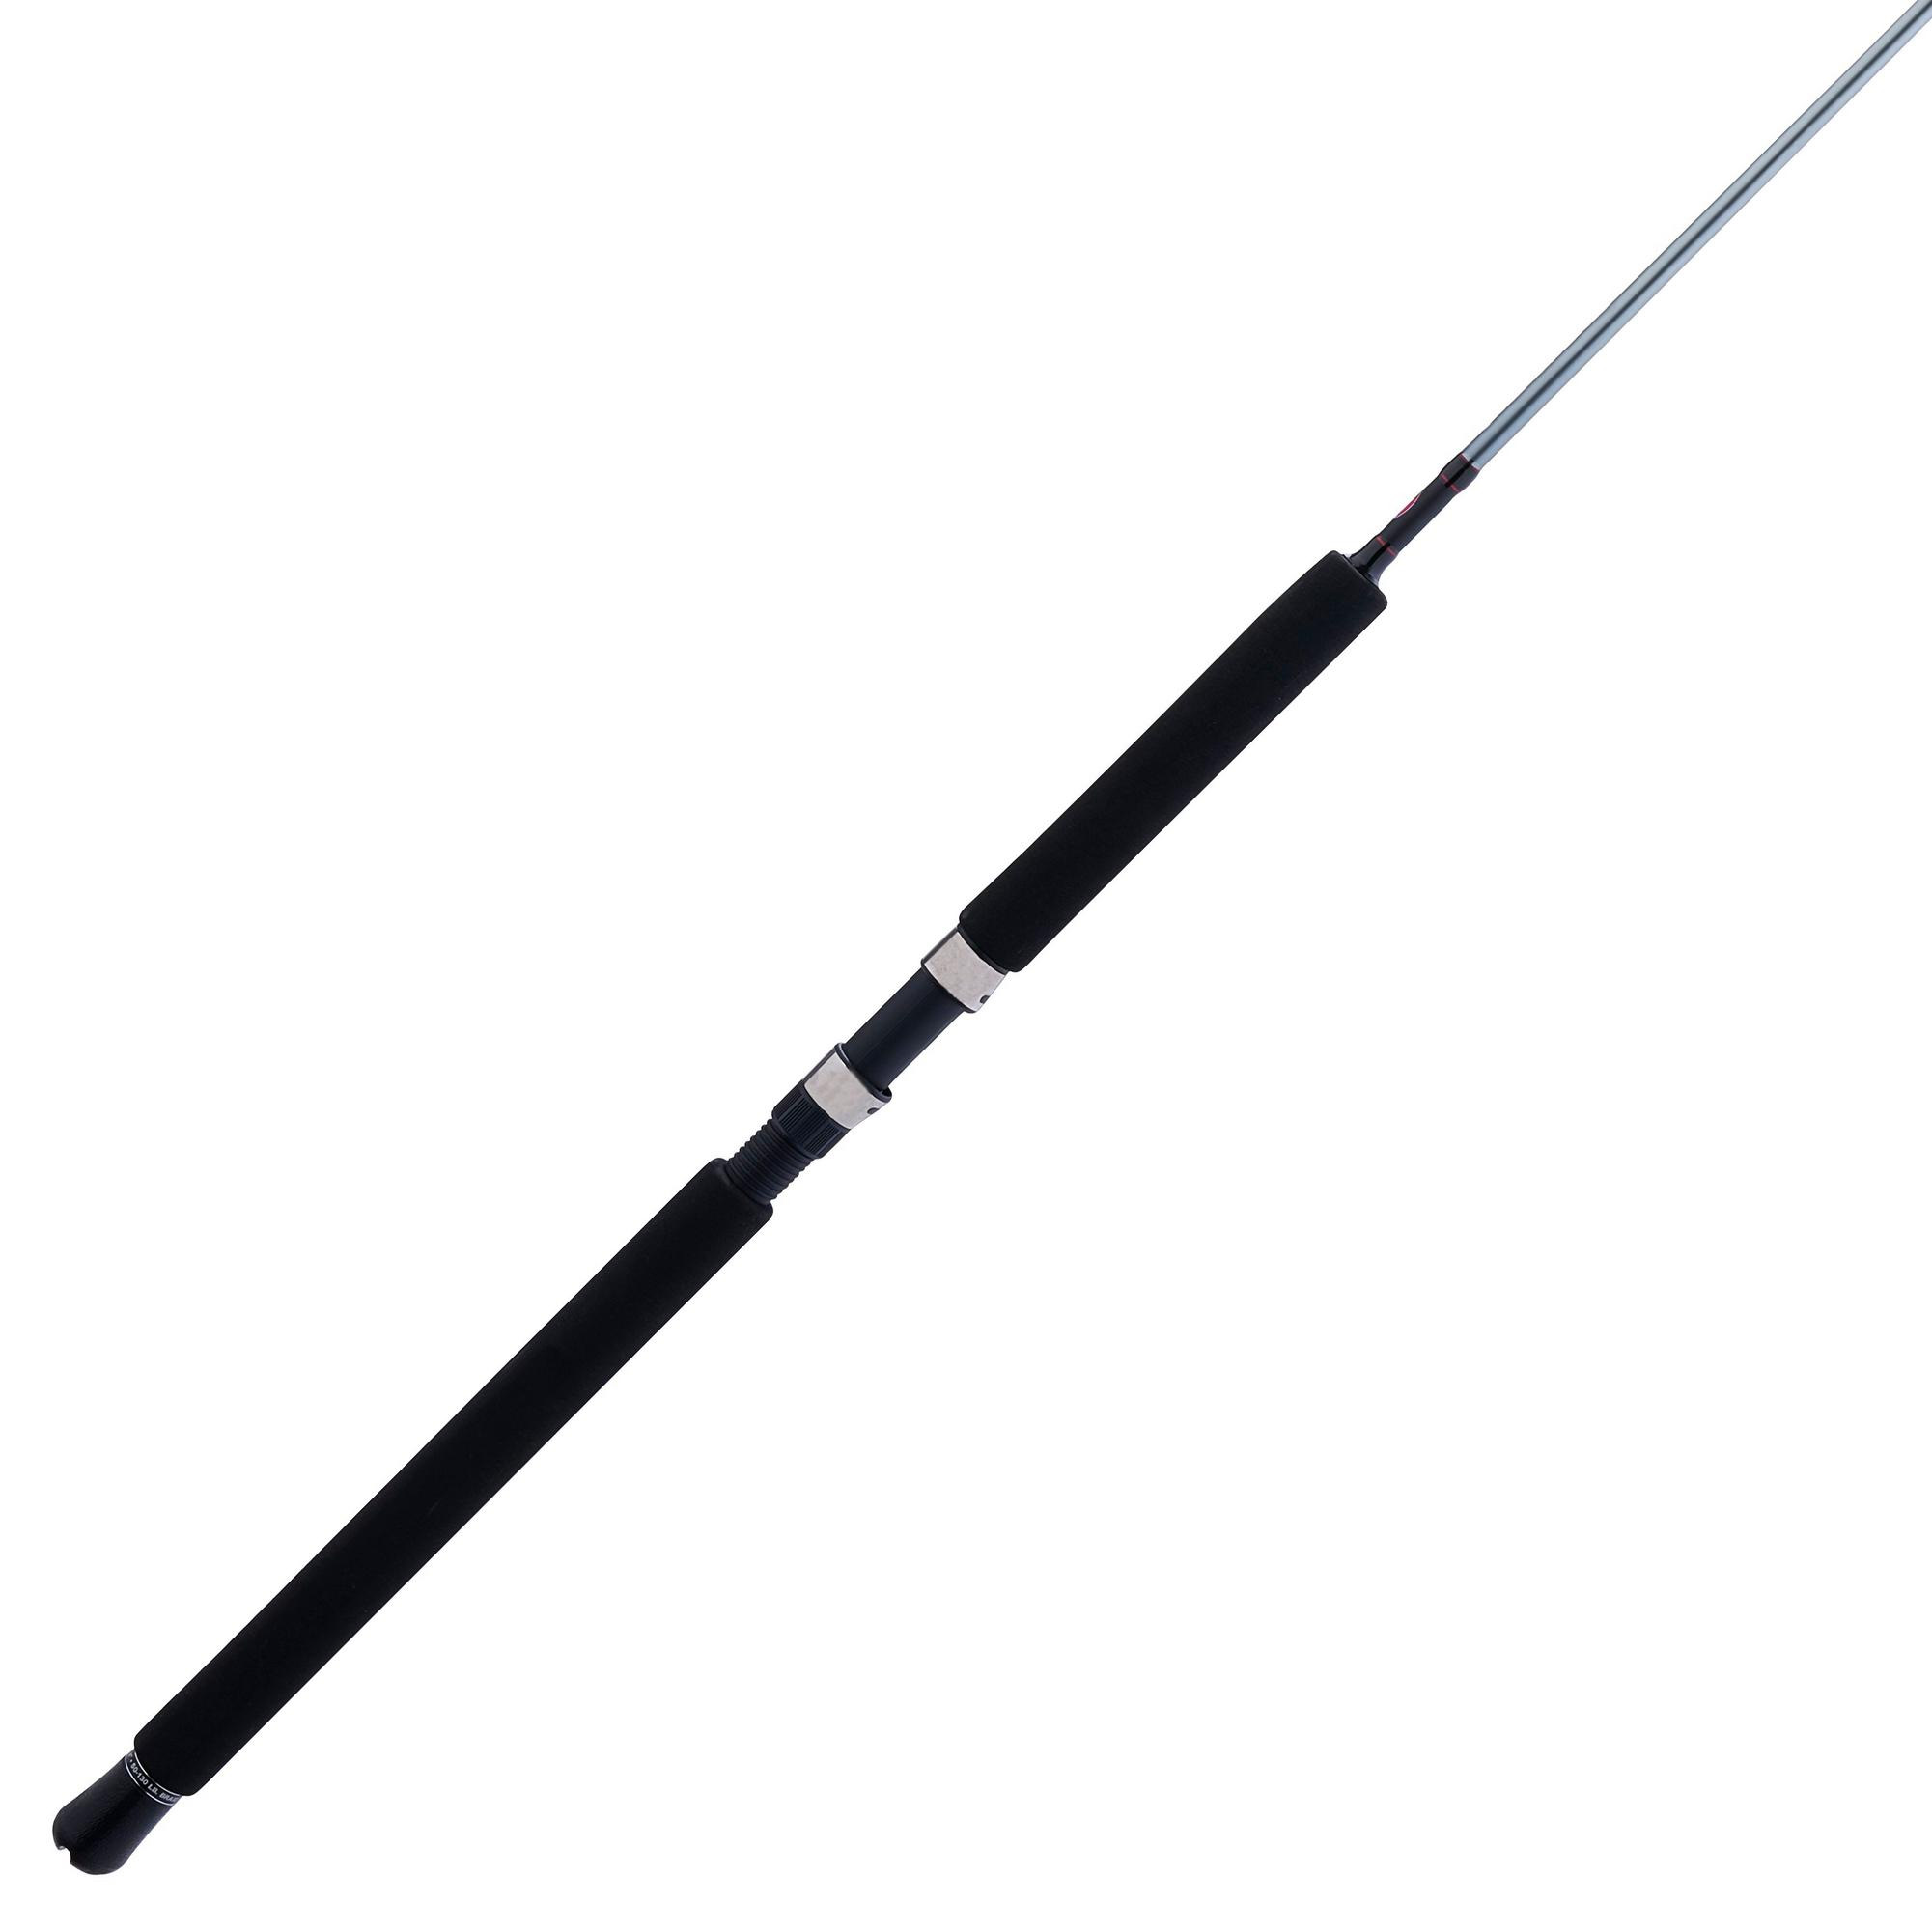 The NEW PENN Prevail III Rods: Upgraded Saltwater Rods